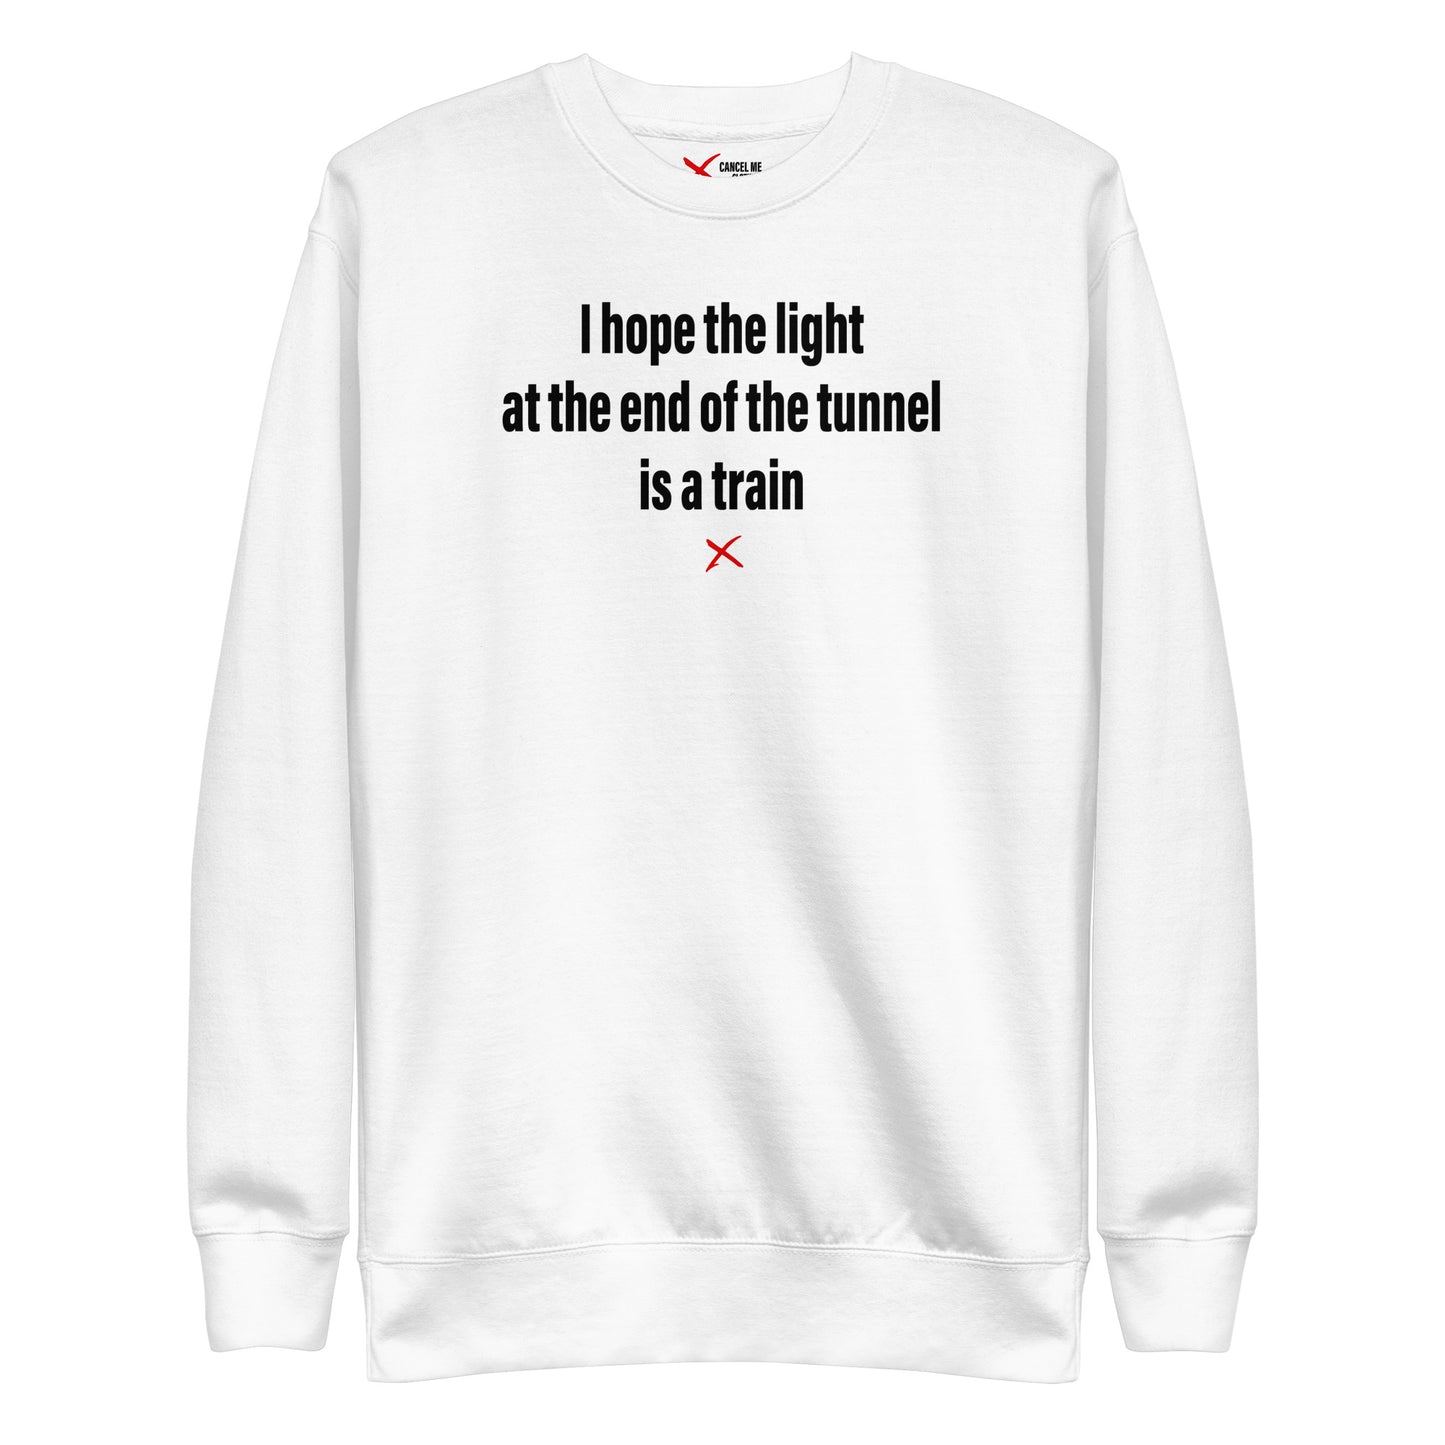 I hope the light at the end of the tunnel is a train - Sweatshirt